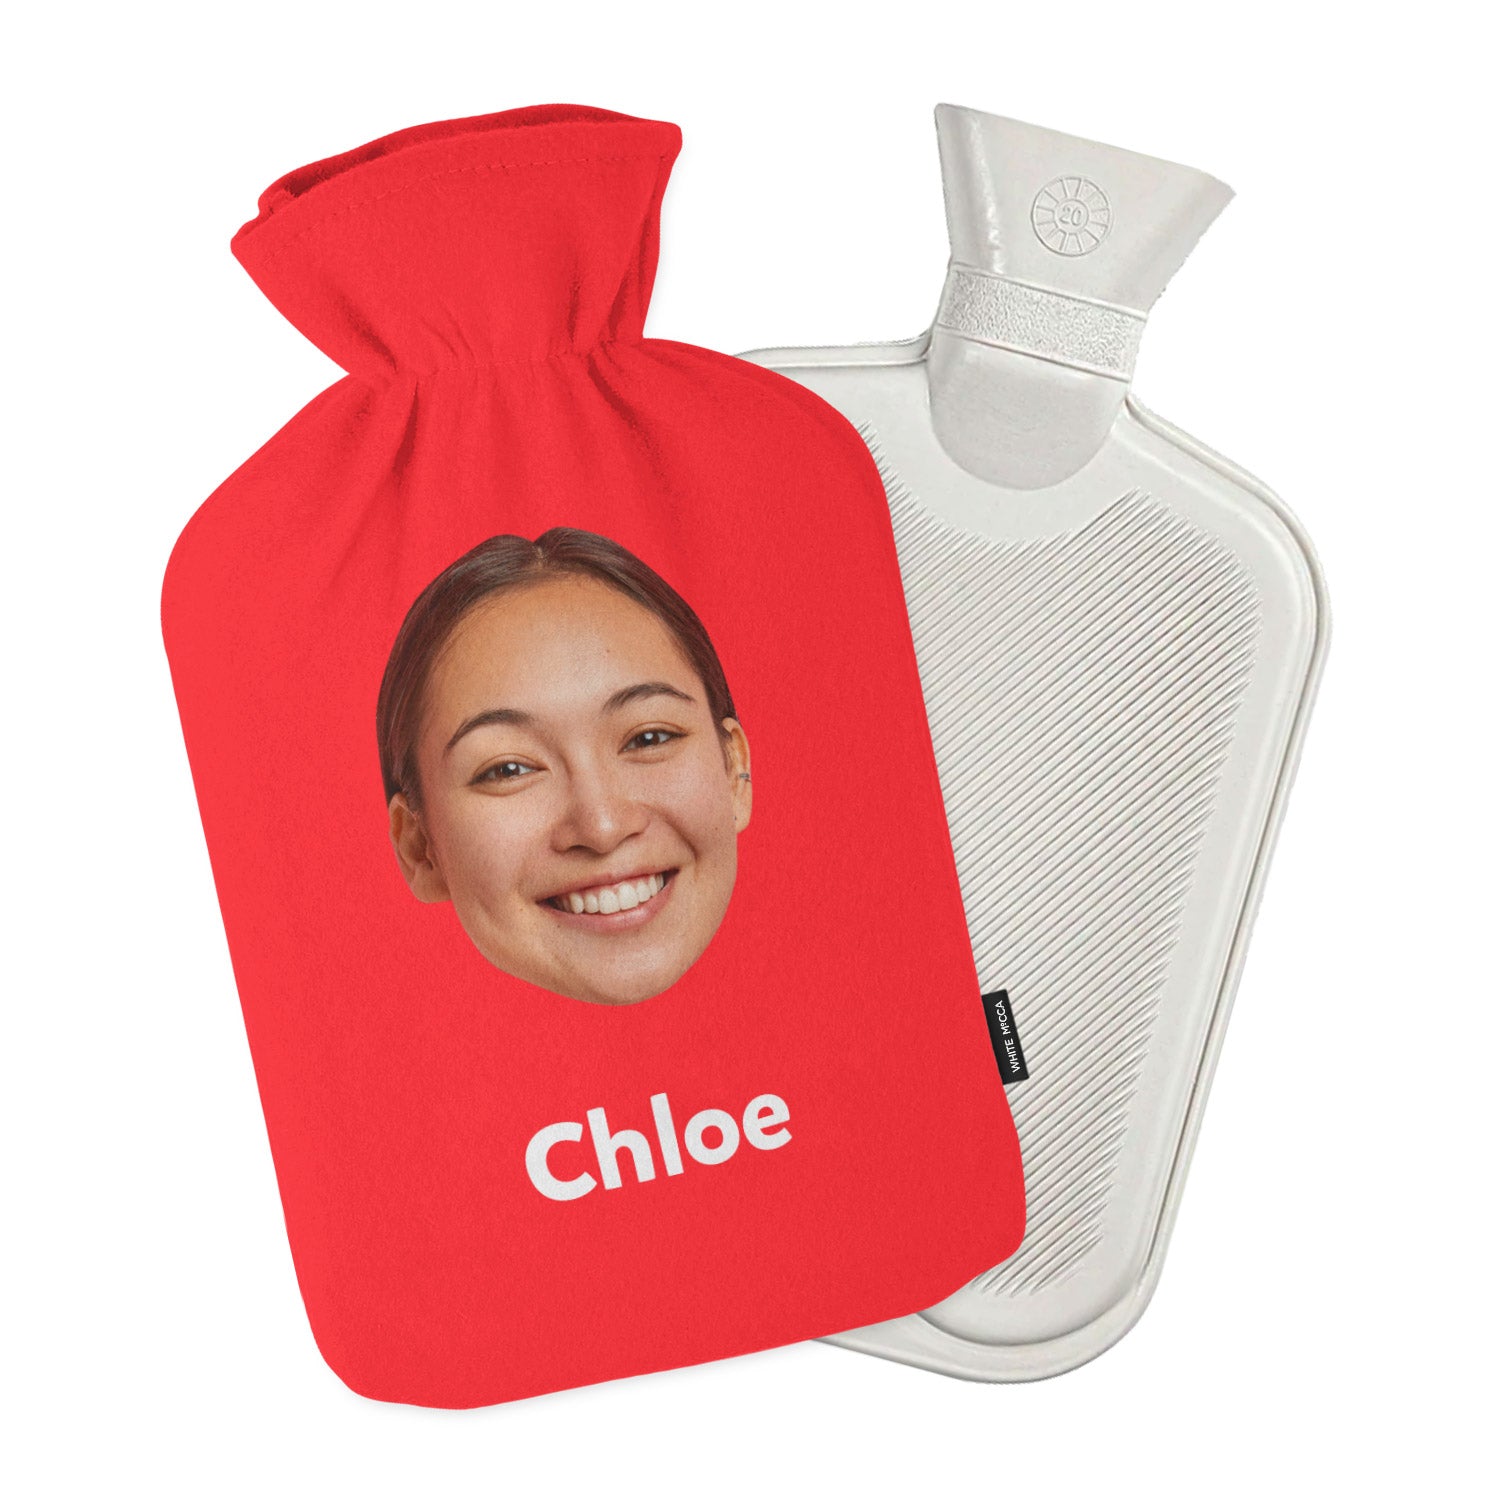 Face & Name Personalised Hot Water Bottle